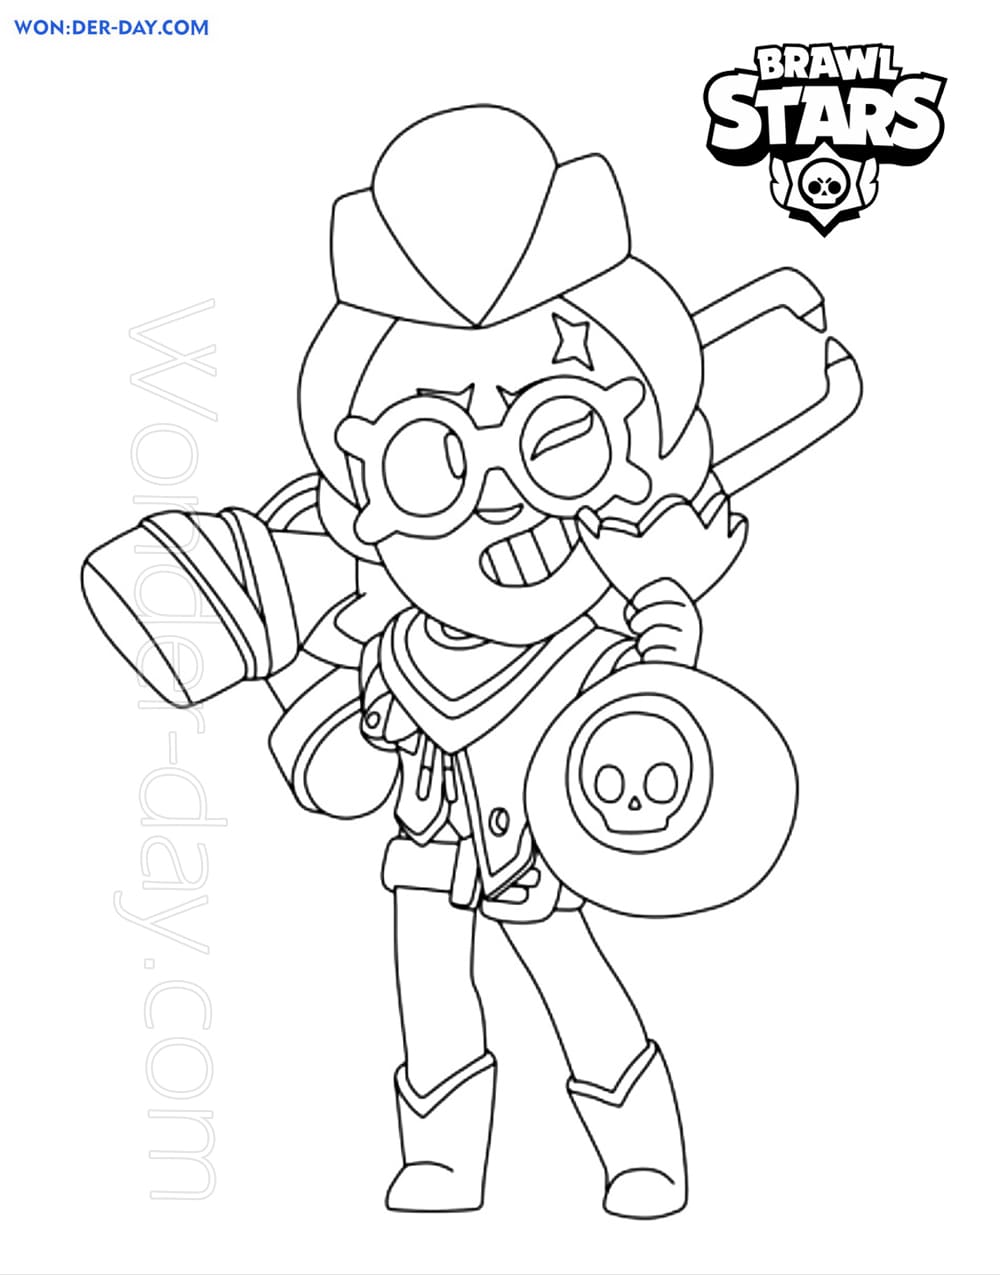 Belle Brawl Stars Coloring Pages Wonder Day Coloring Pages For Children And Adults - brawl s stars para cpolorir